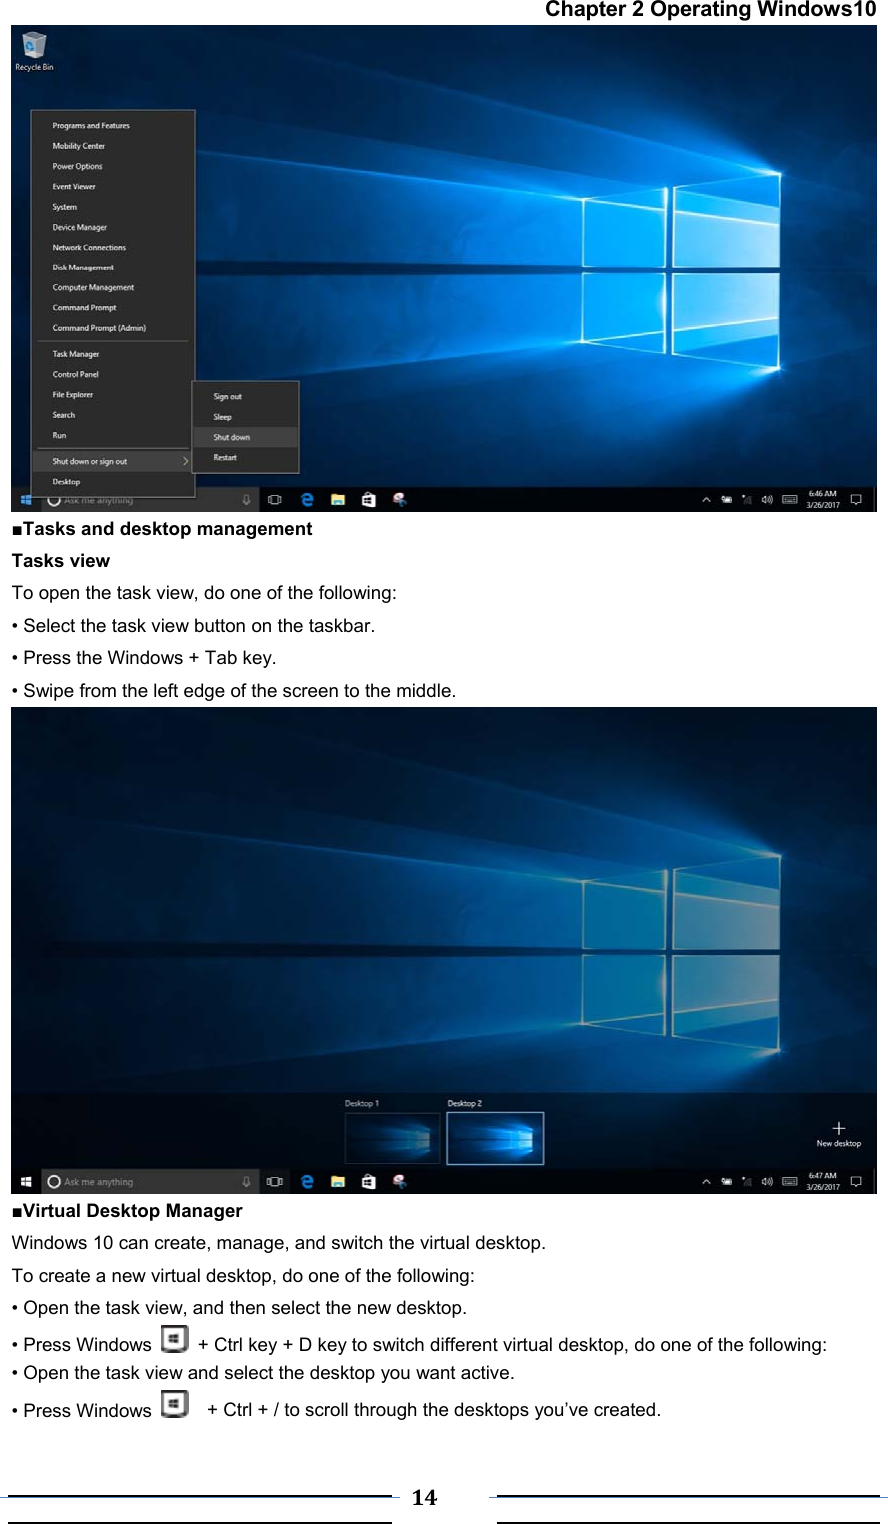  14 Chapter 2 Operating Windows10  ■Tasks and desktop management  Tasks view To open the task view, do one of the following: • Select the task view button on the taskbar. • Press the Windows + Tab key. • Swipe from the left edge of the screen to the middle.   ■Virtual Desktop Manager Windows 10 can create, manage, and switch the virtual desktop. To create a new virtual desktop, do one of the following: • Open the task view, and then select the new desktop. • Press Windows    + Ctrl key + D key to switch different virtual desktop, do one of the following: • Open the task view and select the desktop you want active. • Press Windows      + Ctrl + / to scroll through the desktops you’ve created. 